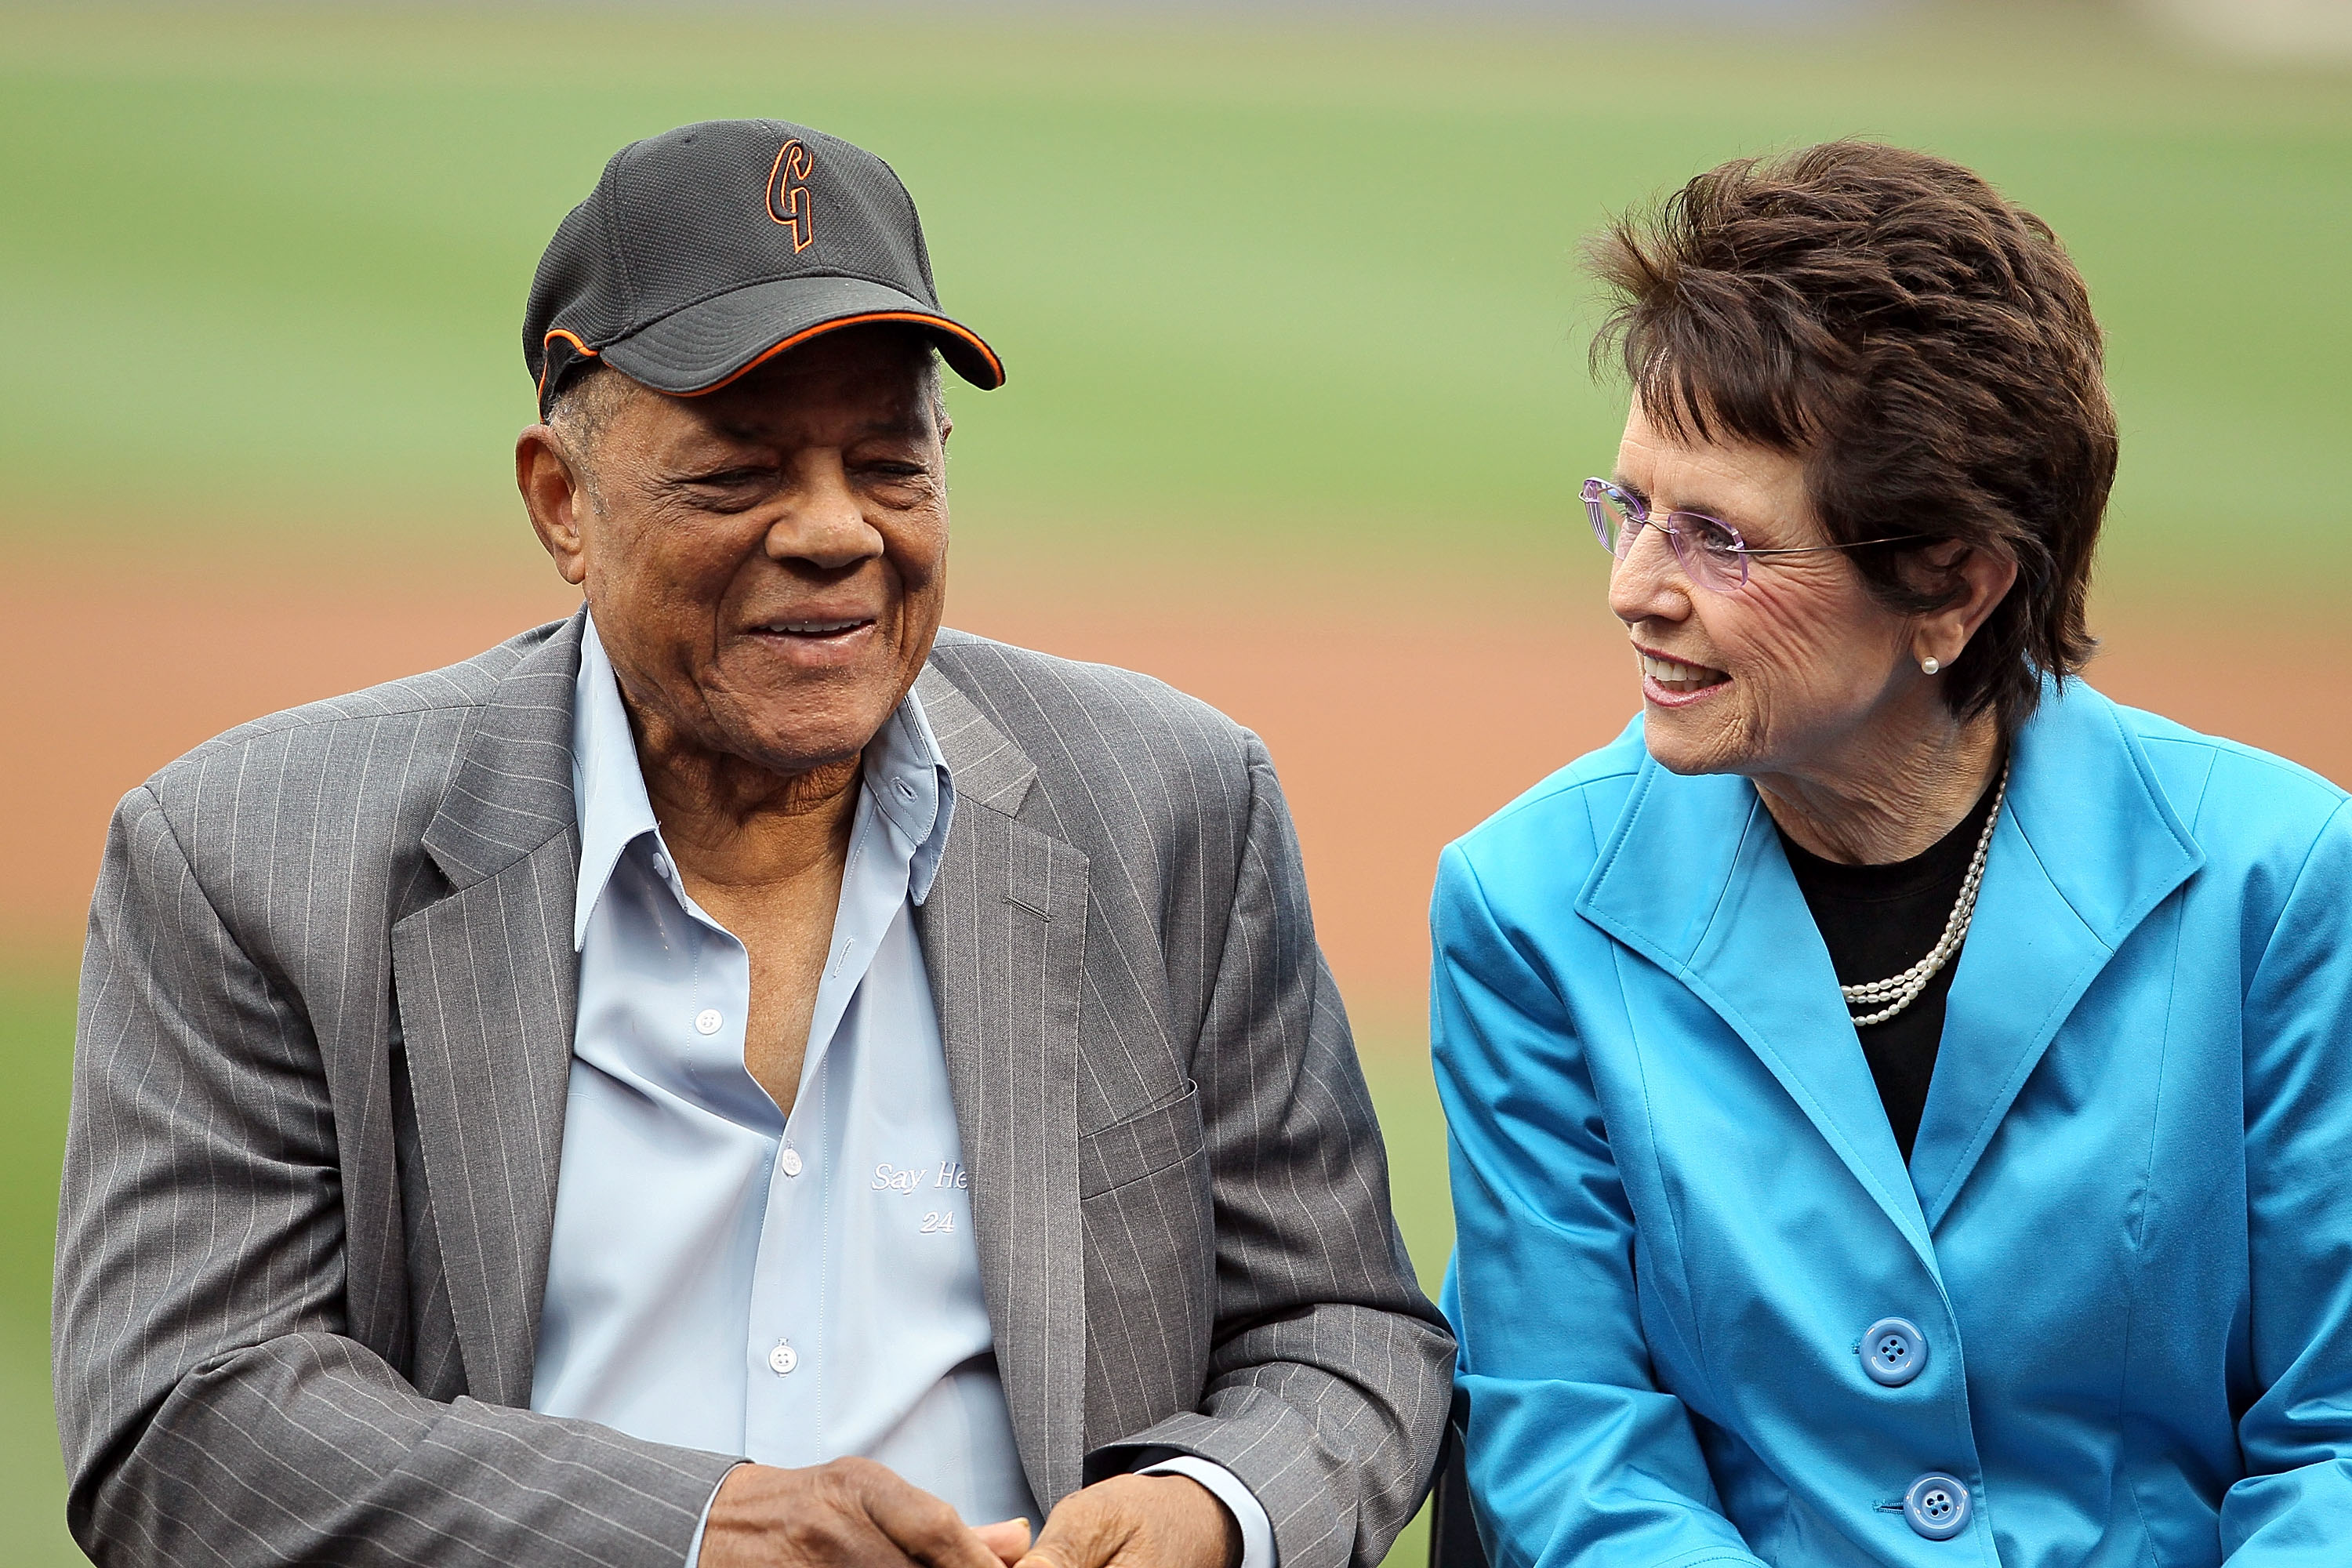 Willie Mays and Billie Jean King talk before receiving their Beacon Awards at the Civil Rights Game in Cincinnati on May 15, 2010. | Source: Getty Images